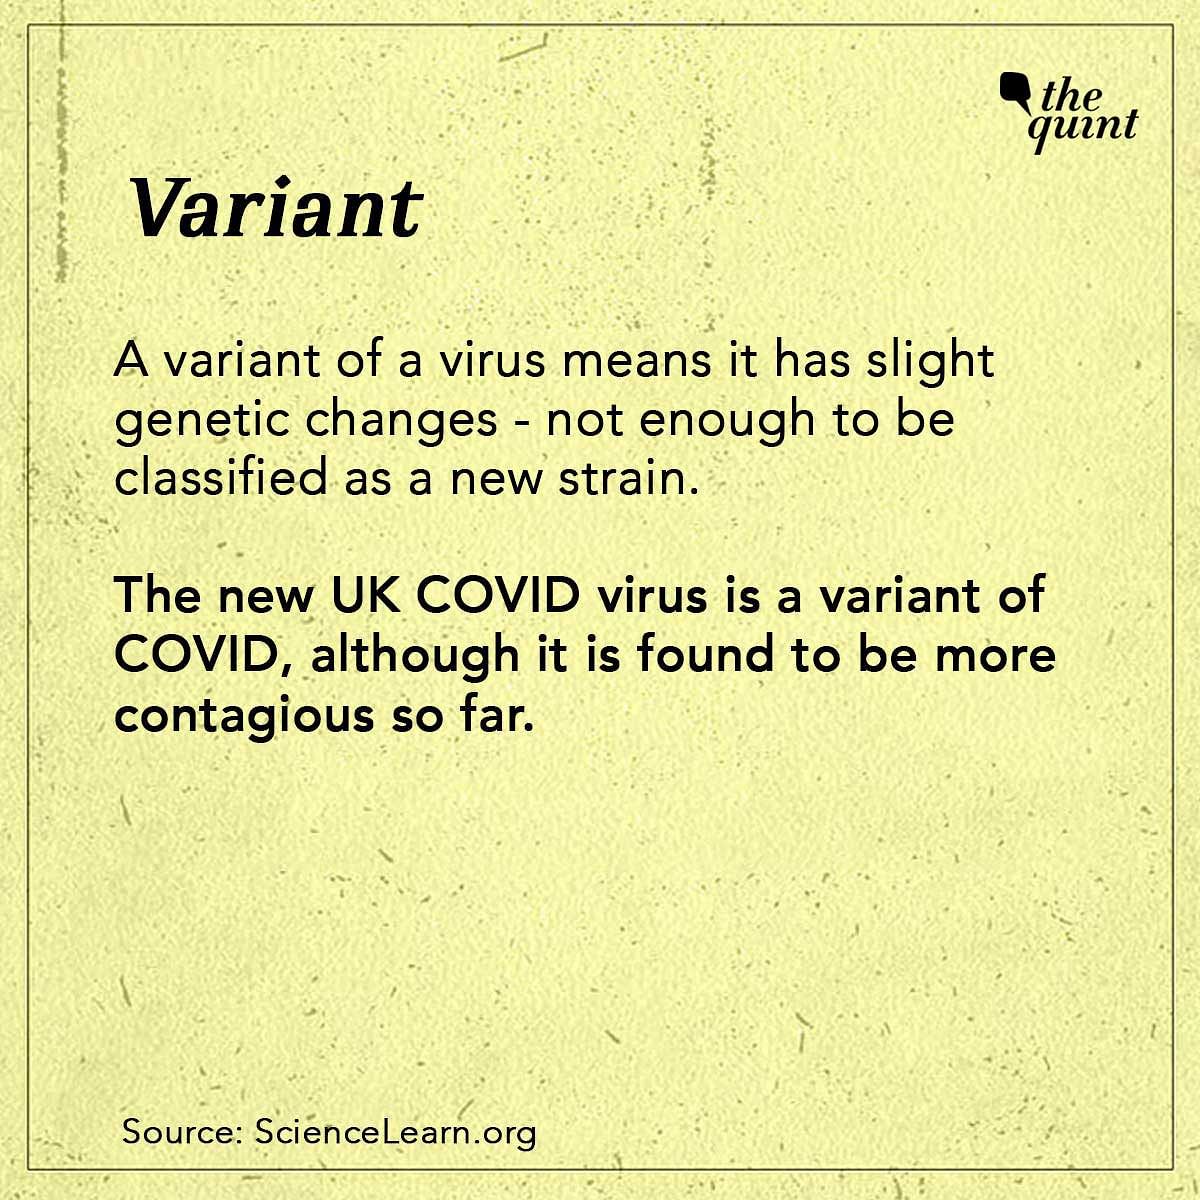 What does a variant even mean? Are mutations among viruses normal?